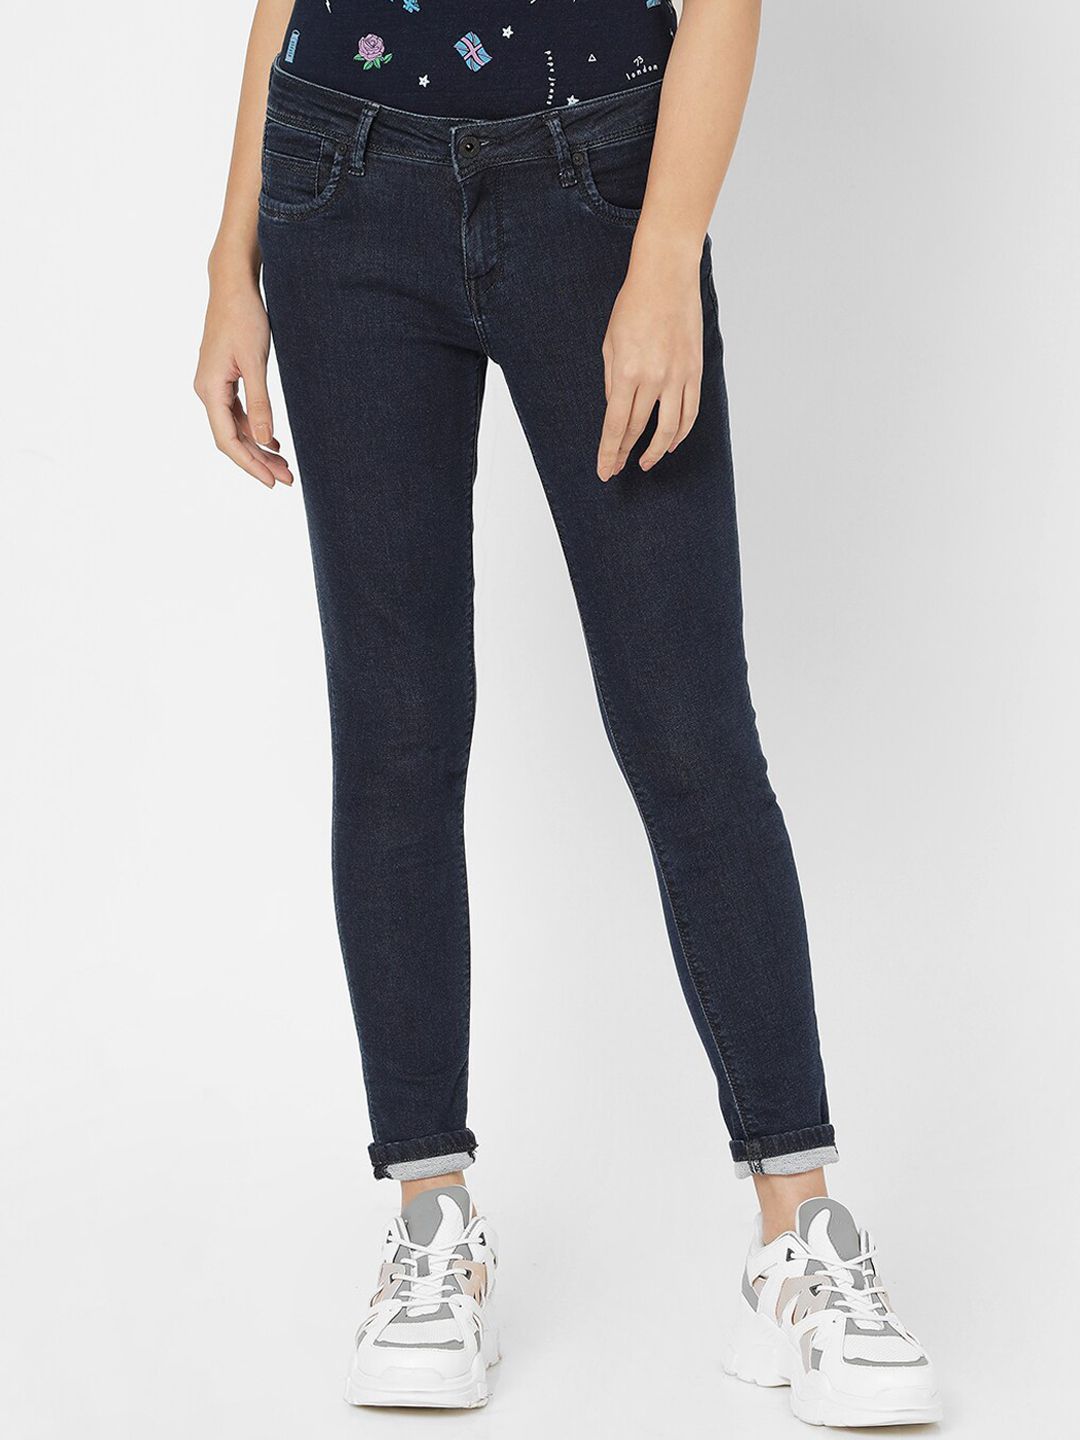 Pepe Jeans Women Navy Blue Solid Skinny Fit Jeans Price in India